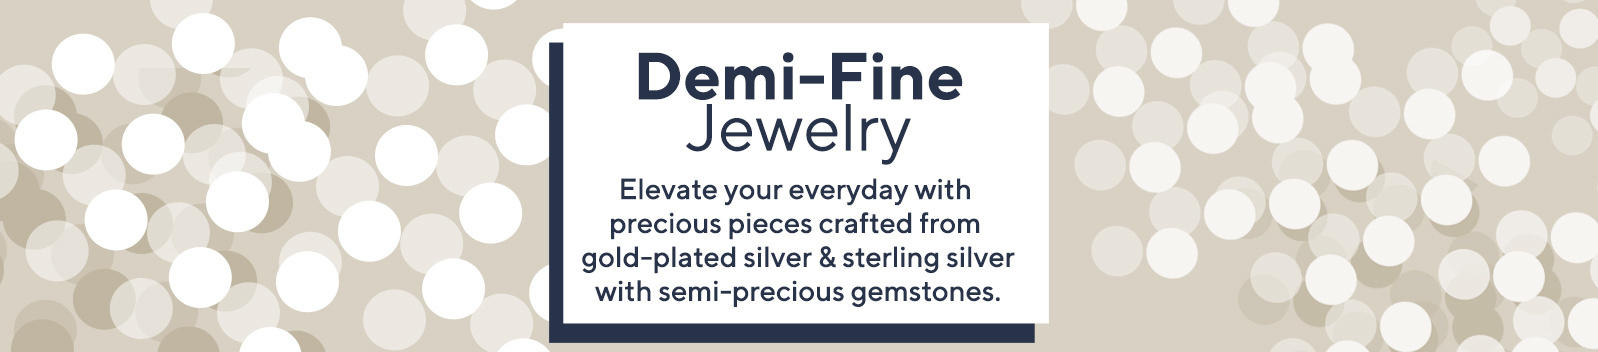 Demi-Fine Jewelry - Elevate your everyday with precious pieces crafted from gold-plated silver & sterling silver with semi-precious gemstones.